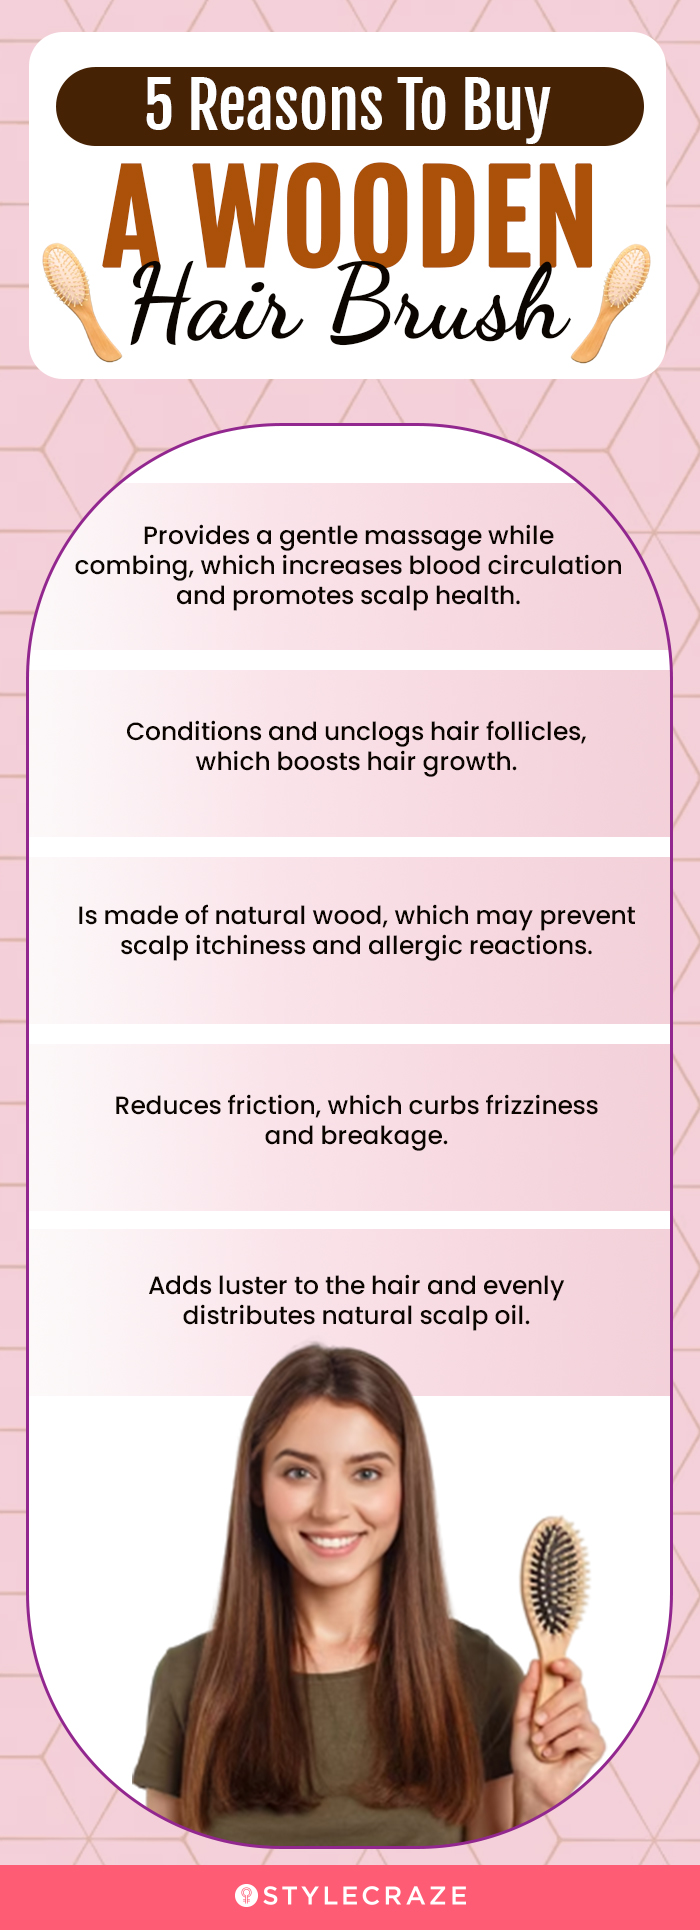 5 reasons to buy a wooden hair brush (infographic)